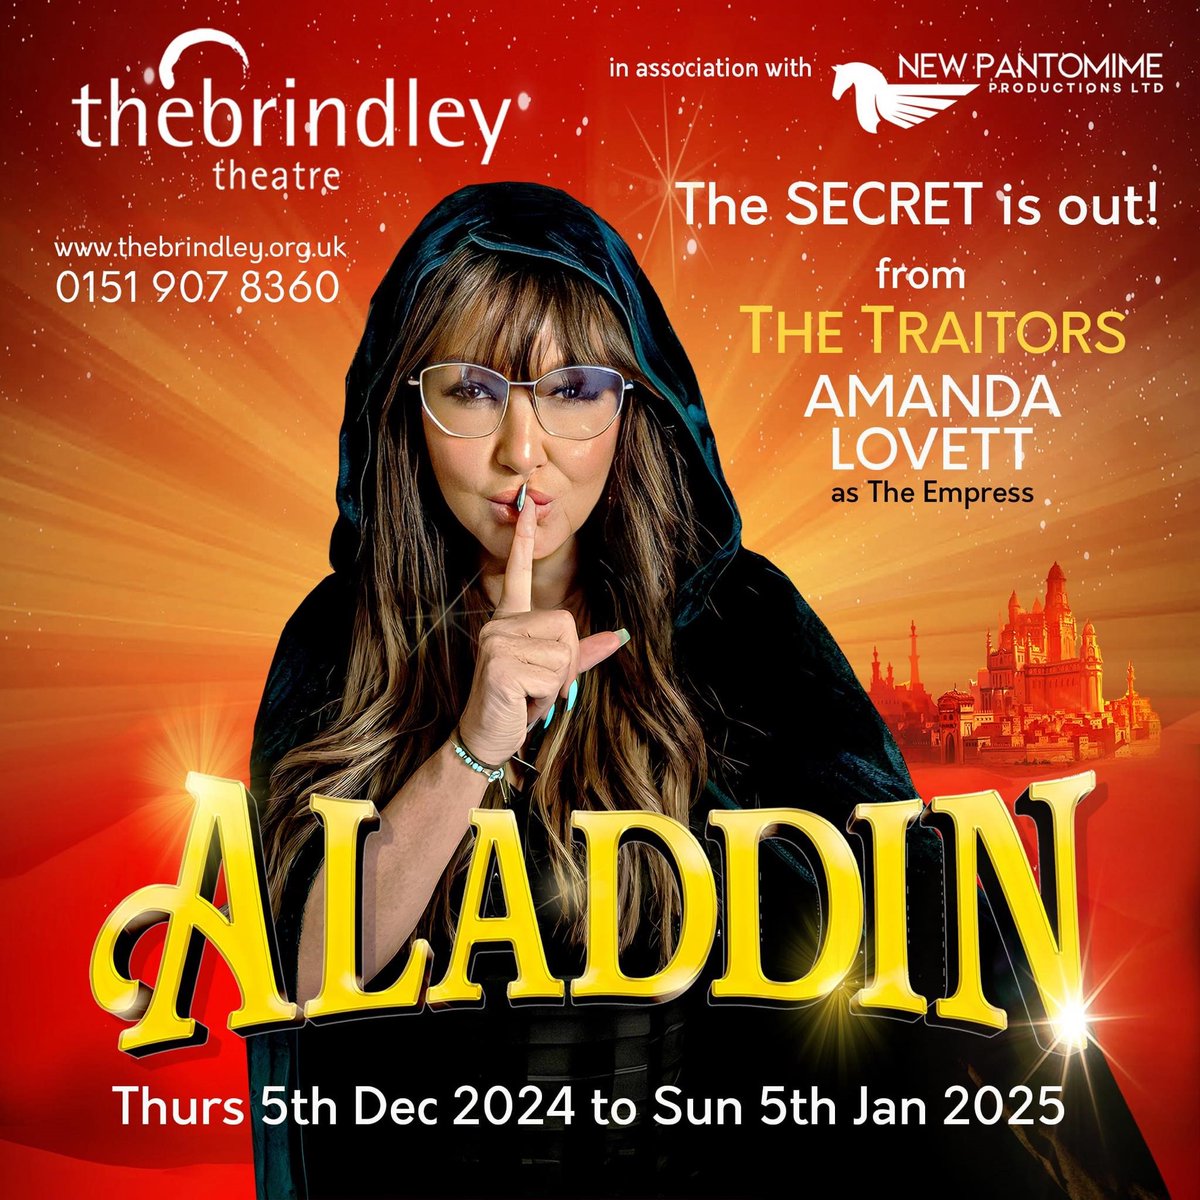 We are delighted to announce that Amanda Lovett from the hit TV show The Traitors will be playing The Empress in our festive panto Aladdin at the Brindley from 5 December until 5 January. Tickets: ow.ly/UvcT50R96nZ